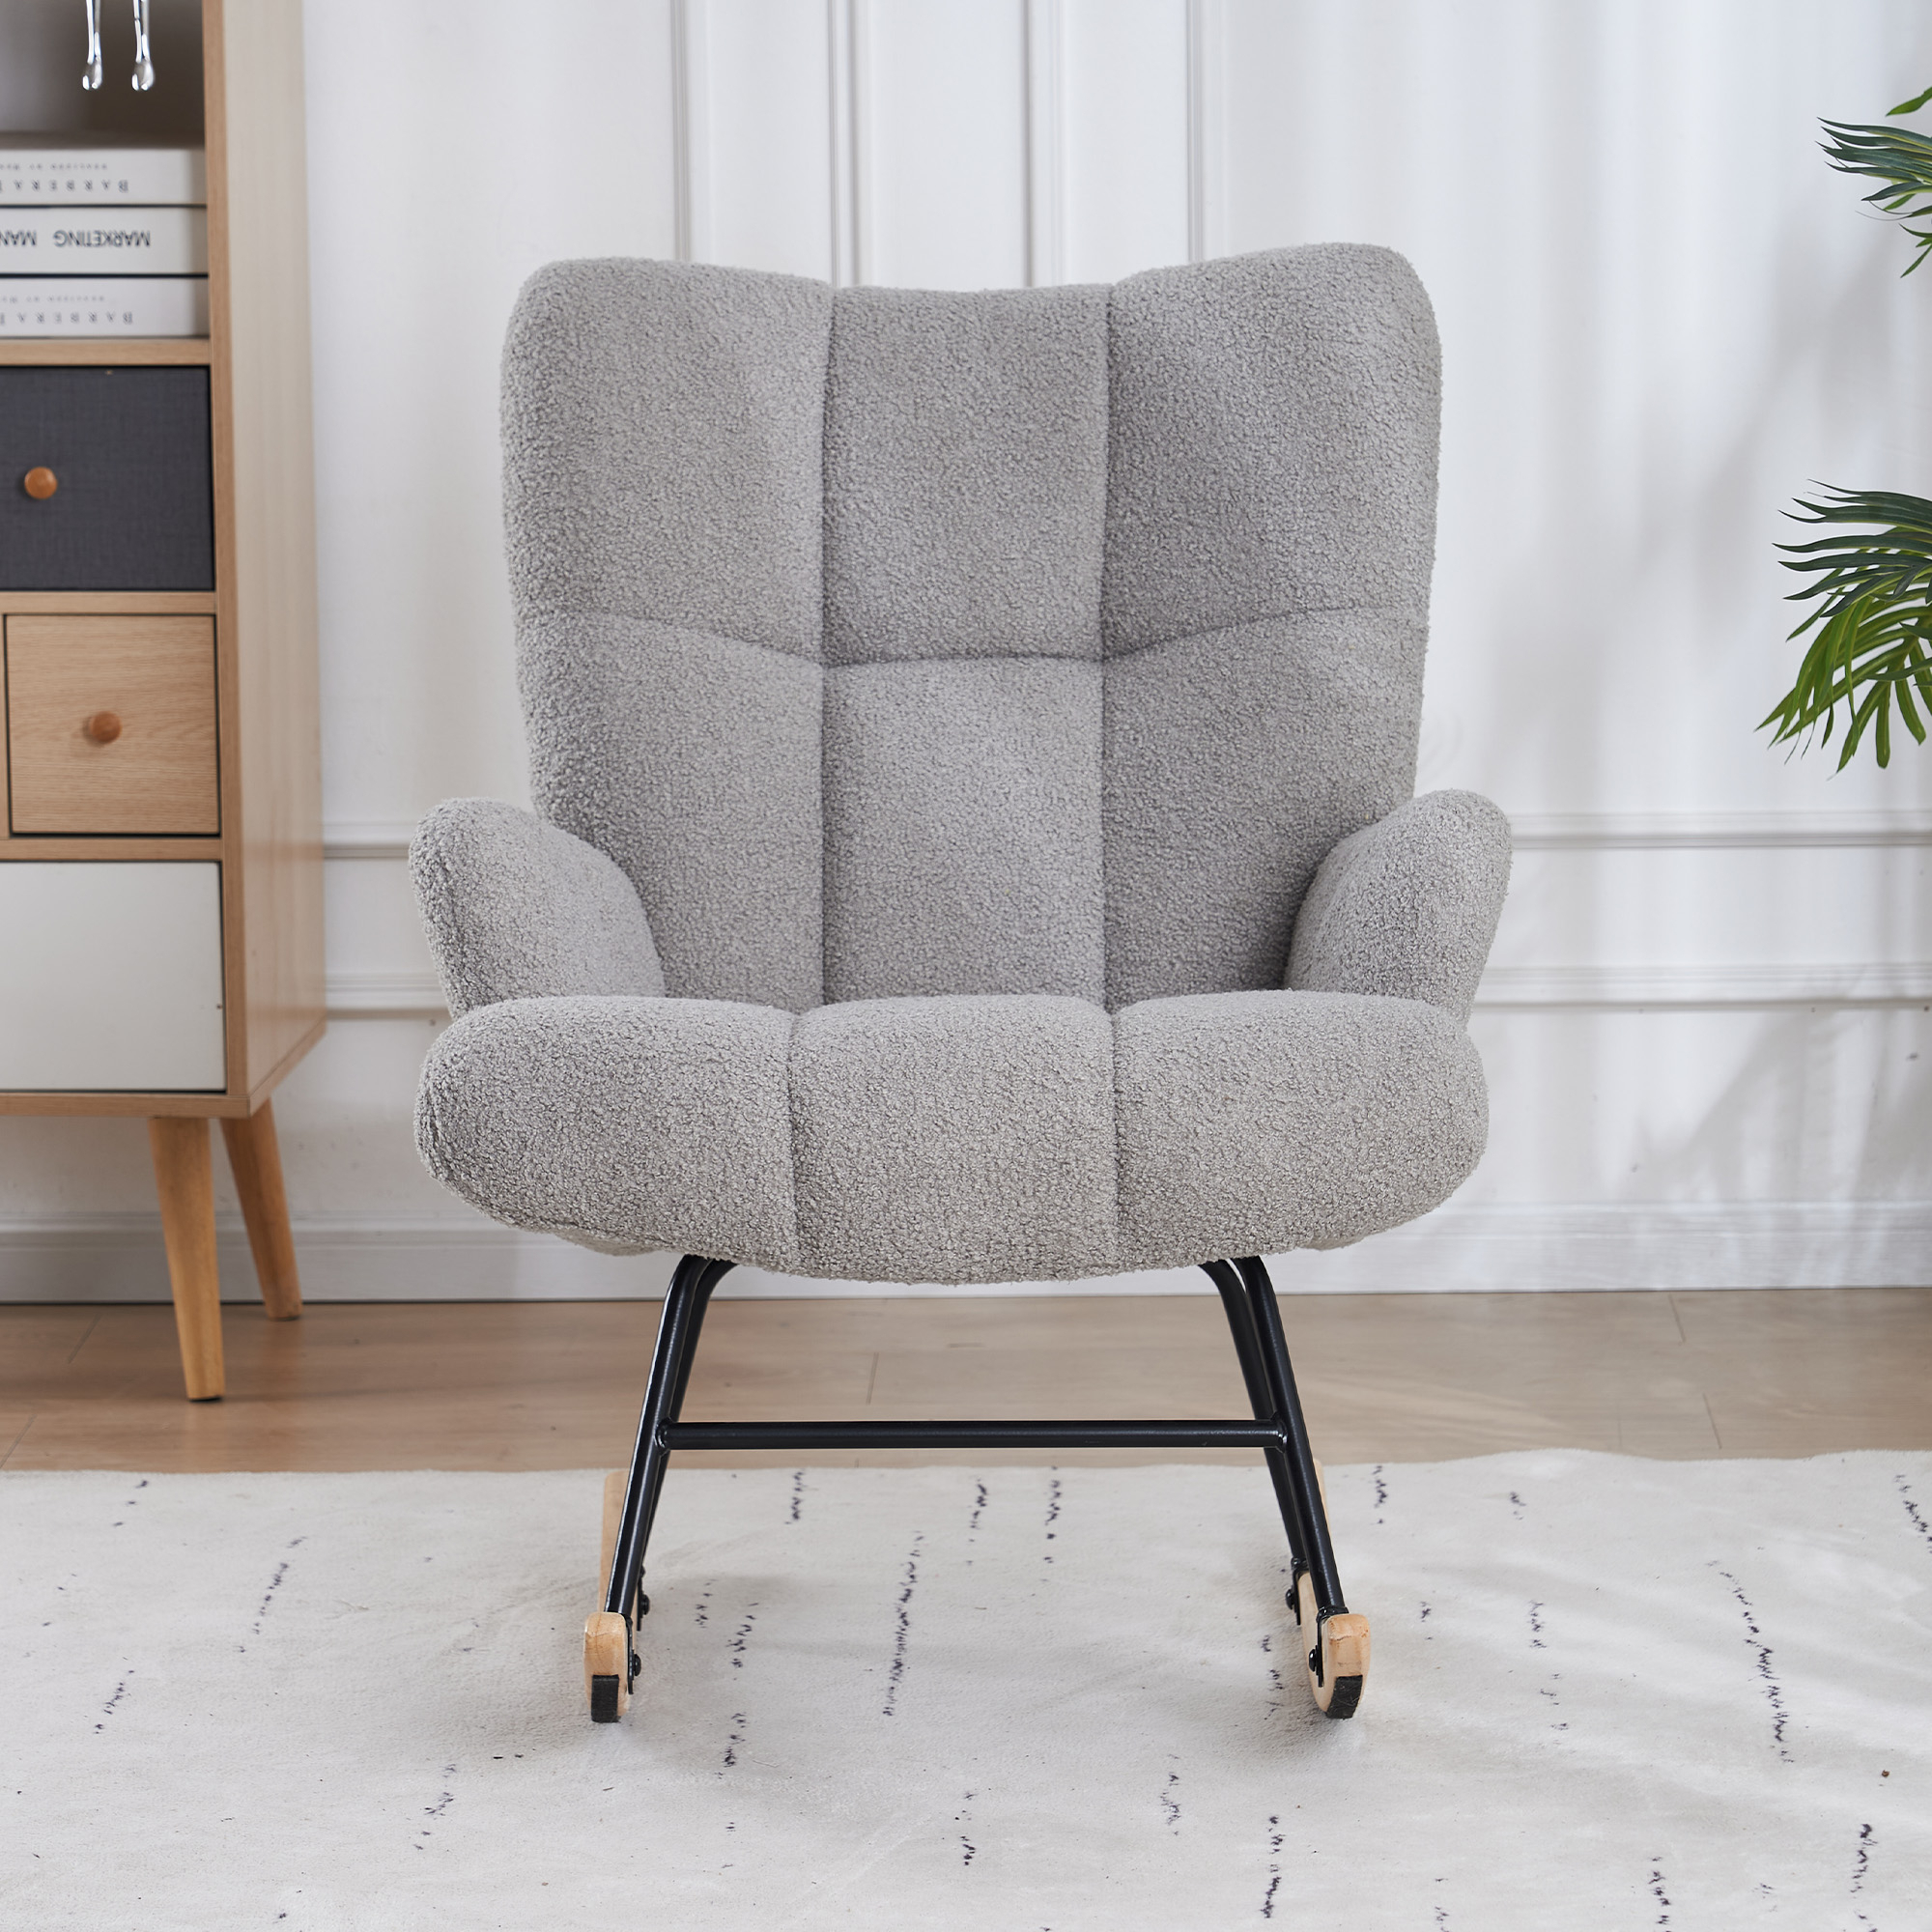 Teddy Velvet Rocking Accent Chair, Uplostered Glider Rocker Armchair For Nursery, Comfy Wingback Armchair - Pale Brown